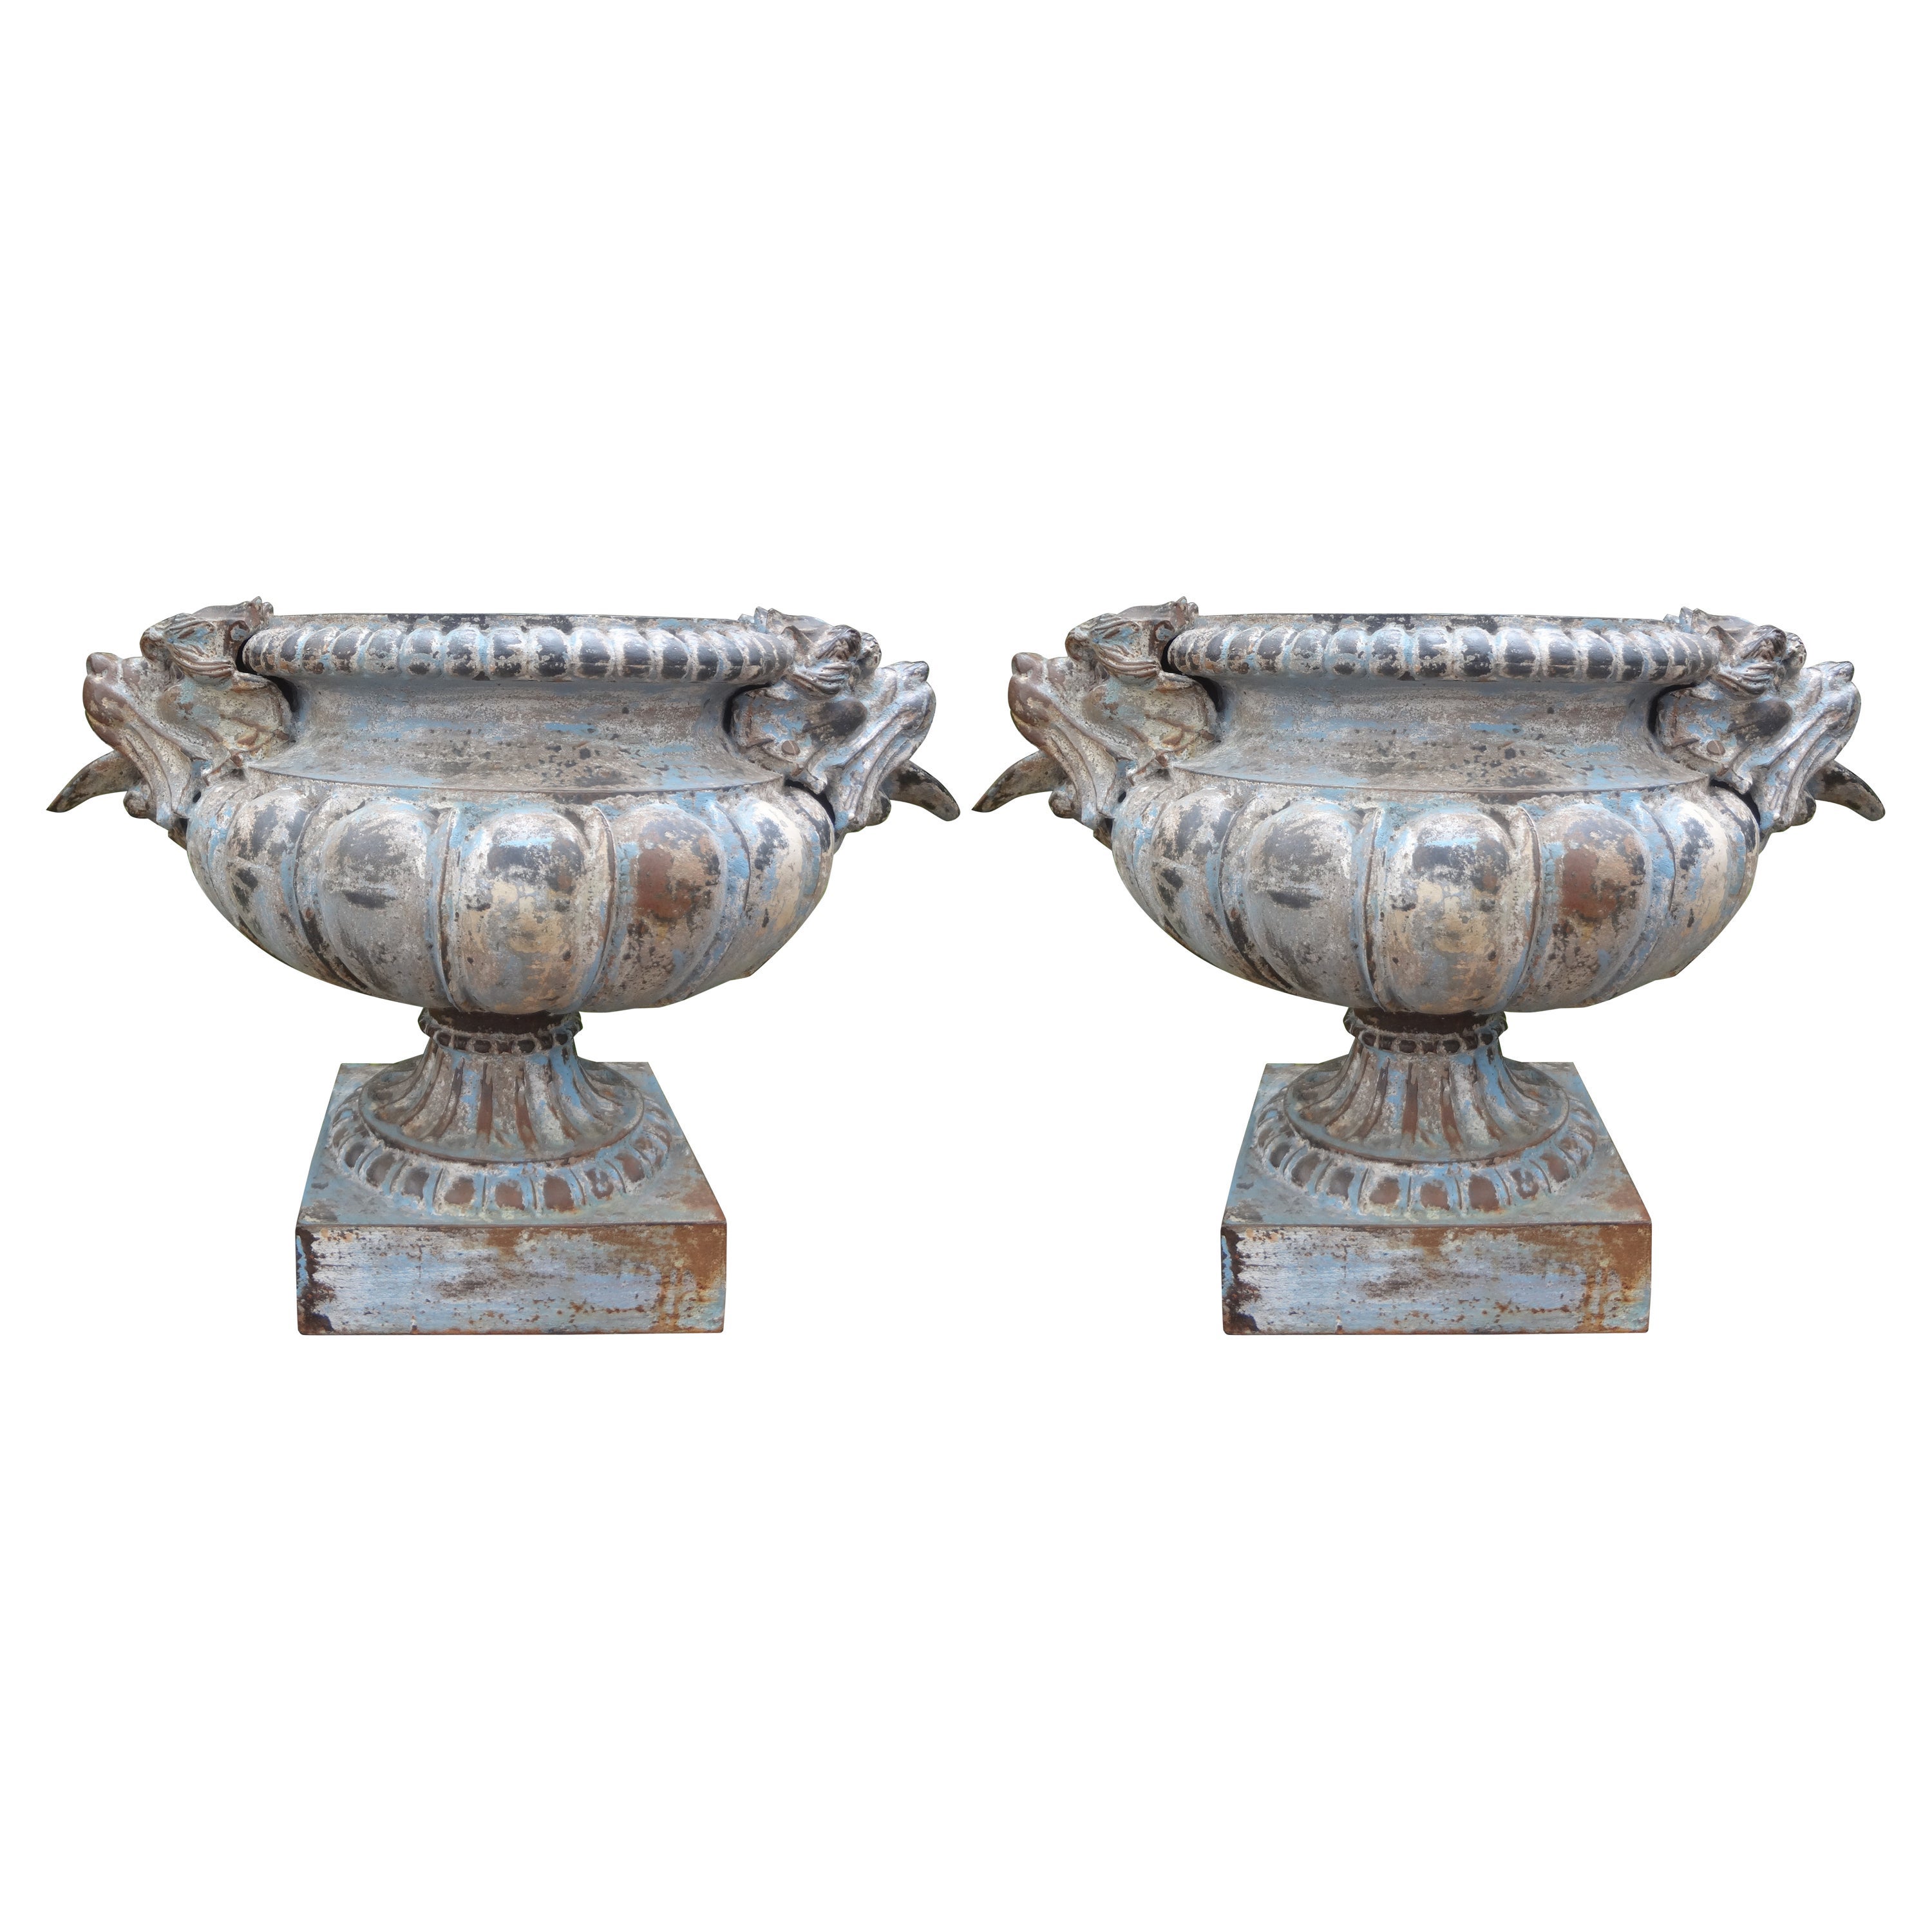 Pair of 19th Century French Cast Iron Garden Urns Attributed to Alfred Corneau For Sale